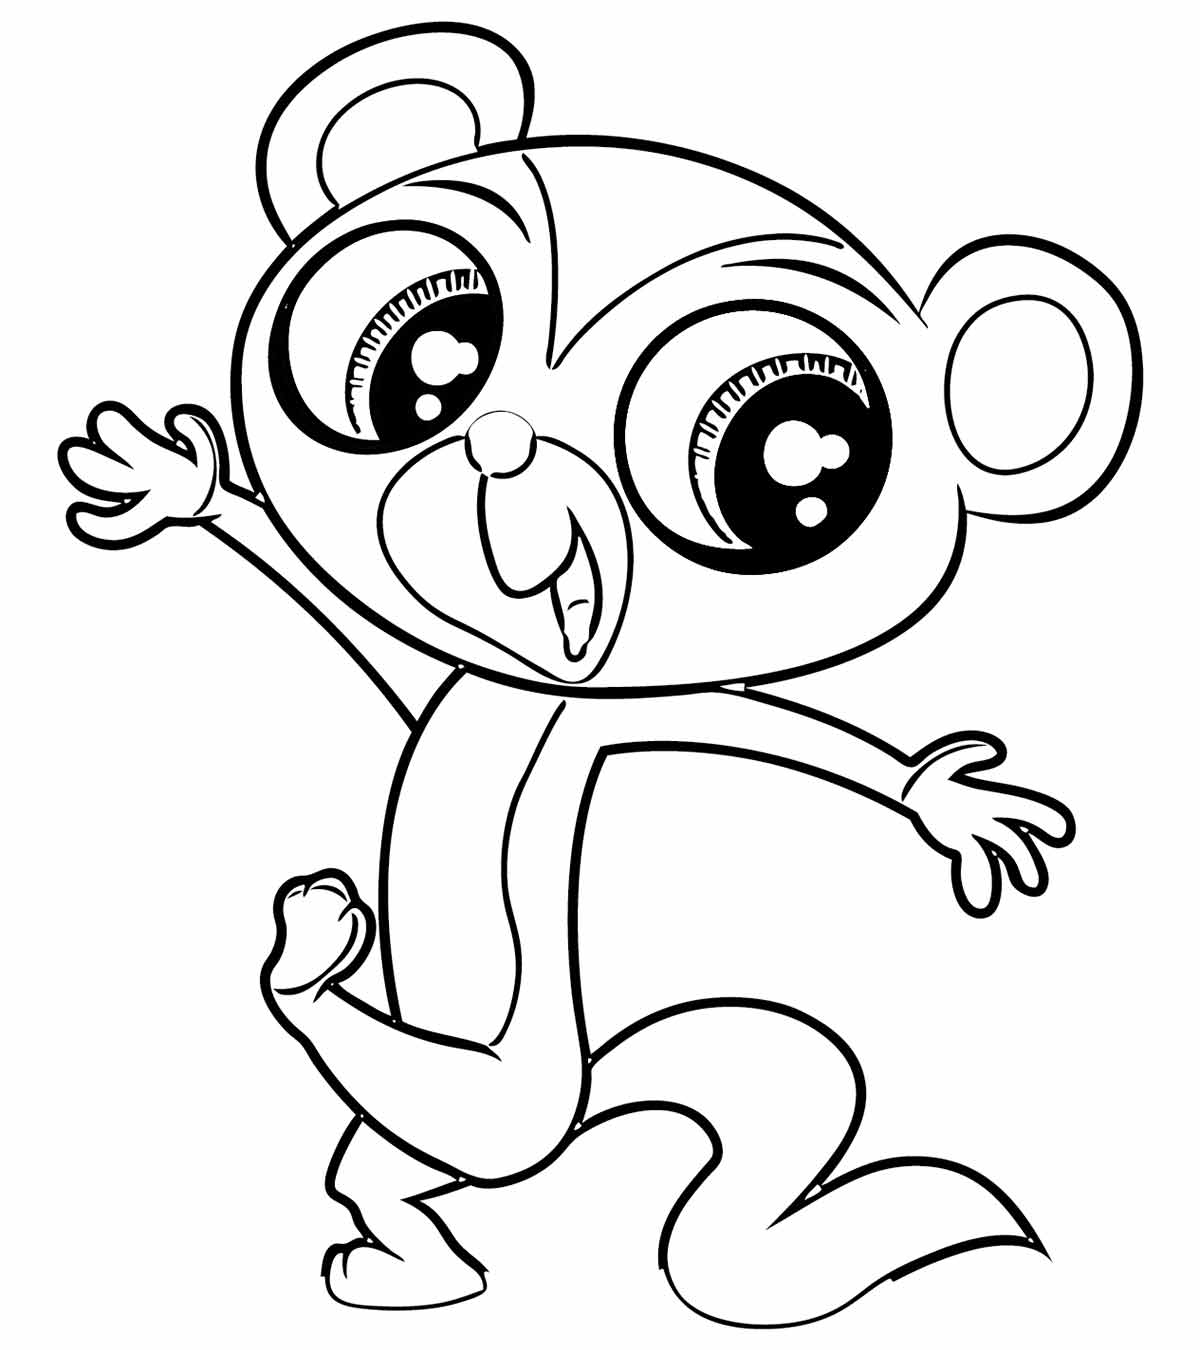 Monkey Dancing In Big City Greens Coloring Pages